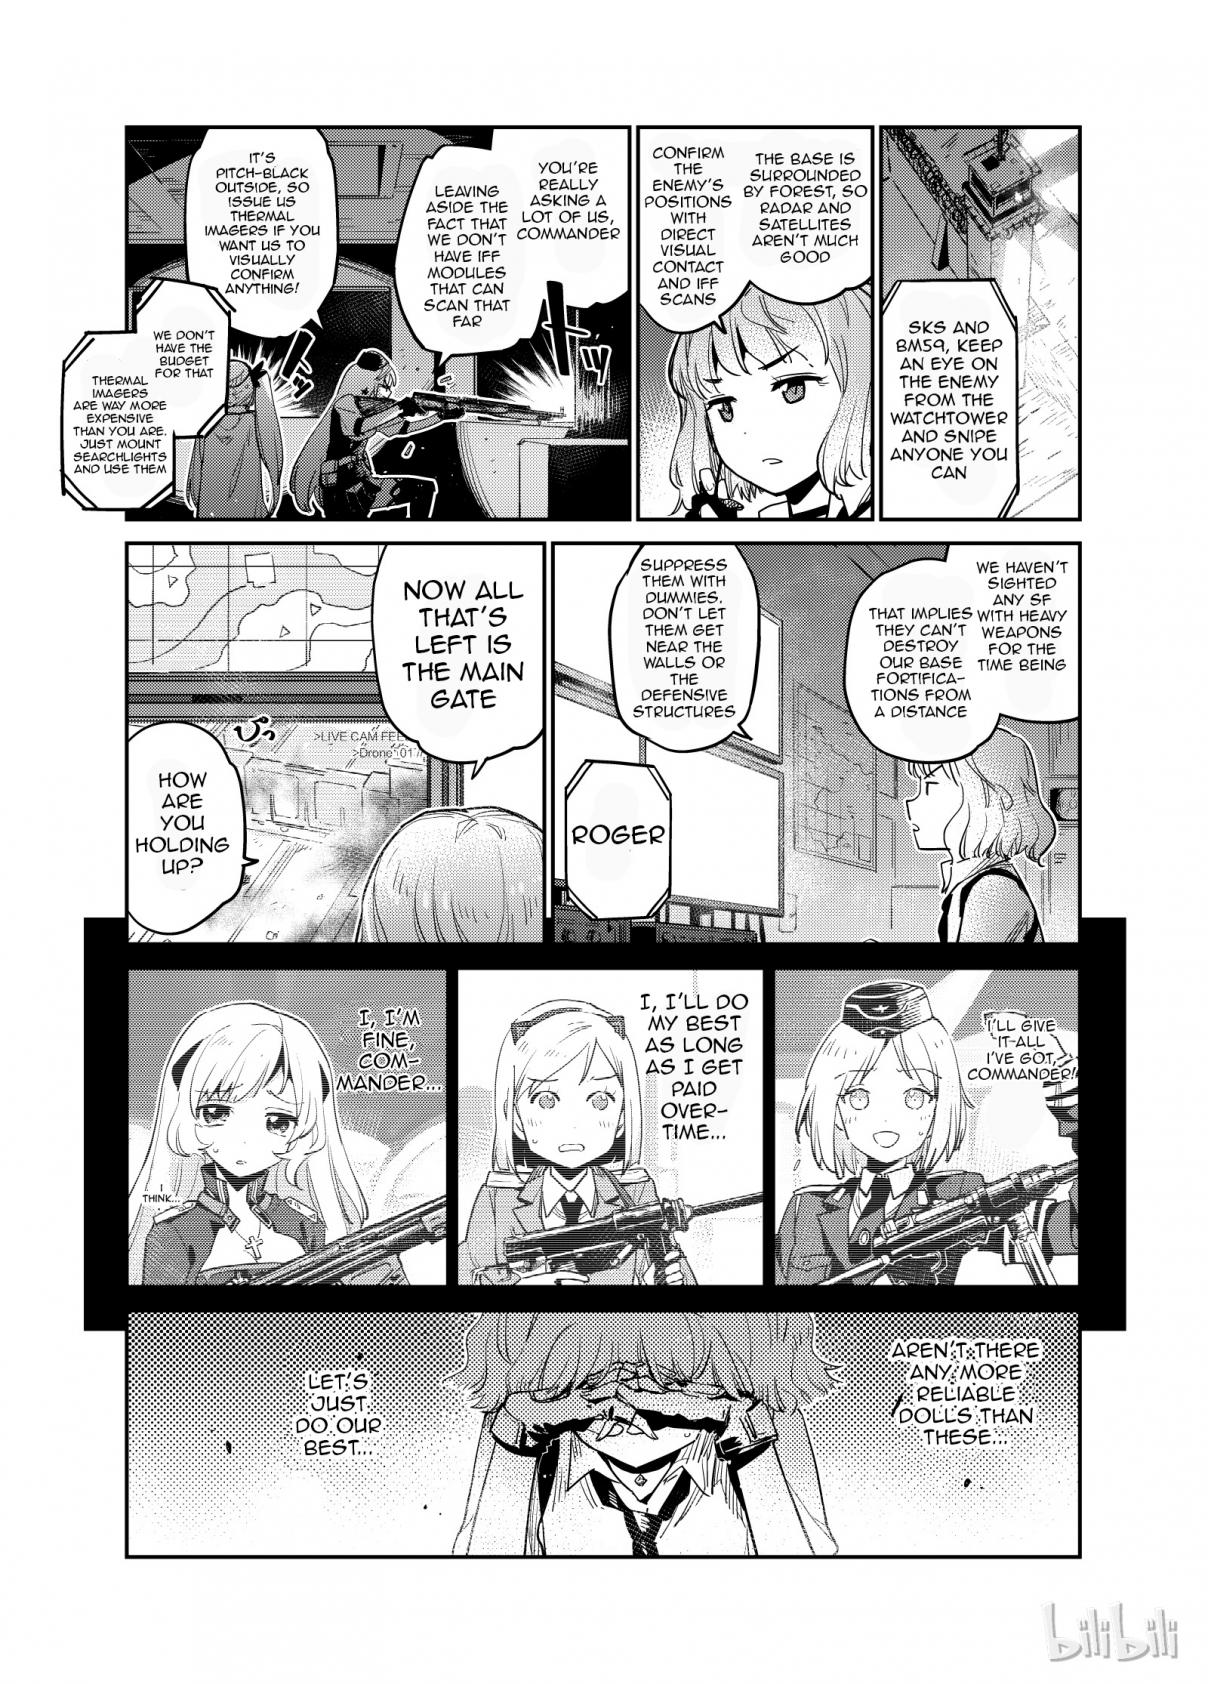 Girls' Frontline Ch. 5 Log. 005 Hound and Friends